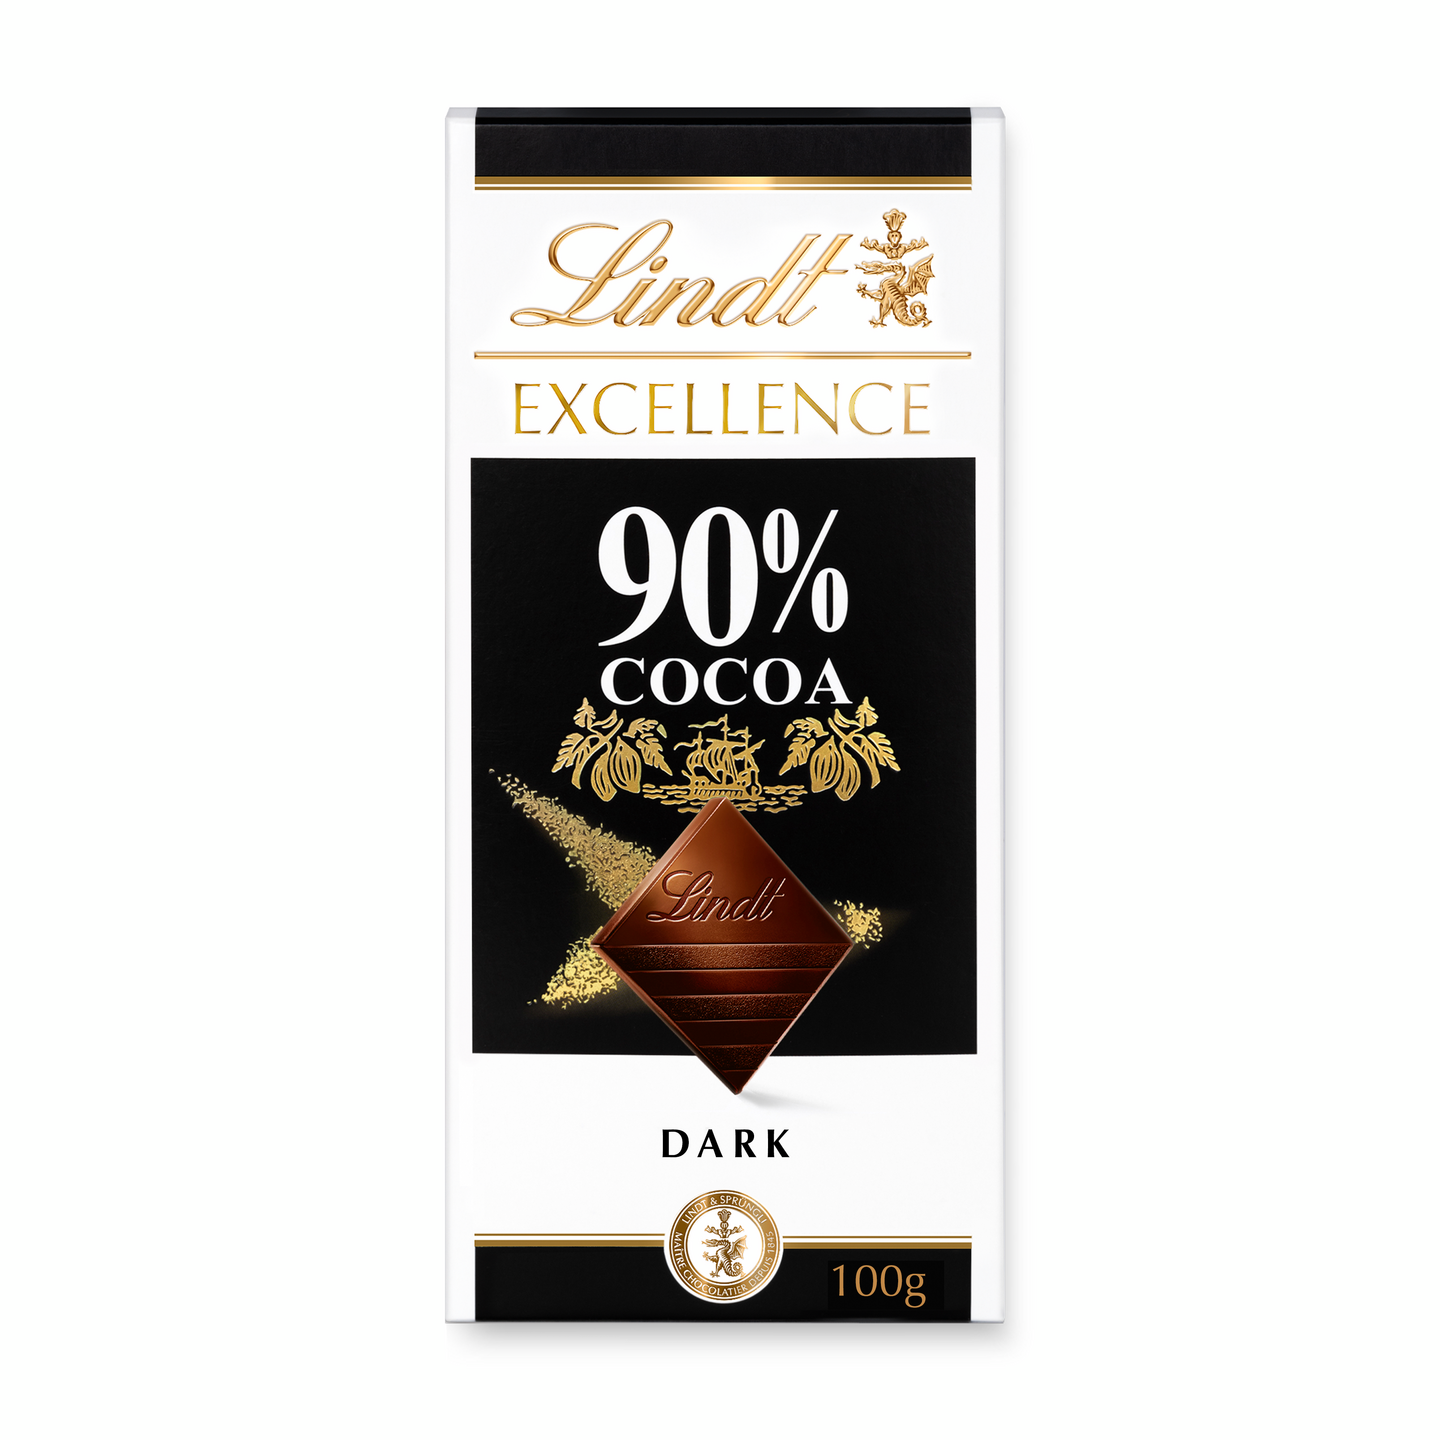 Lindt EXCELLENCE 90% tumma suklaalevy 100g